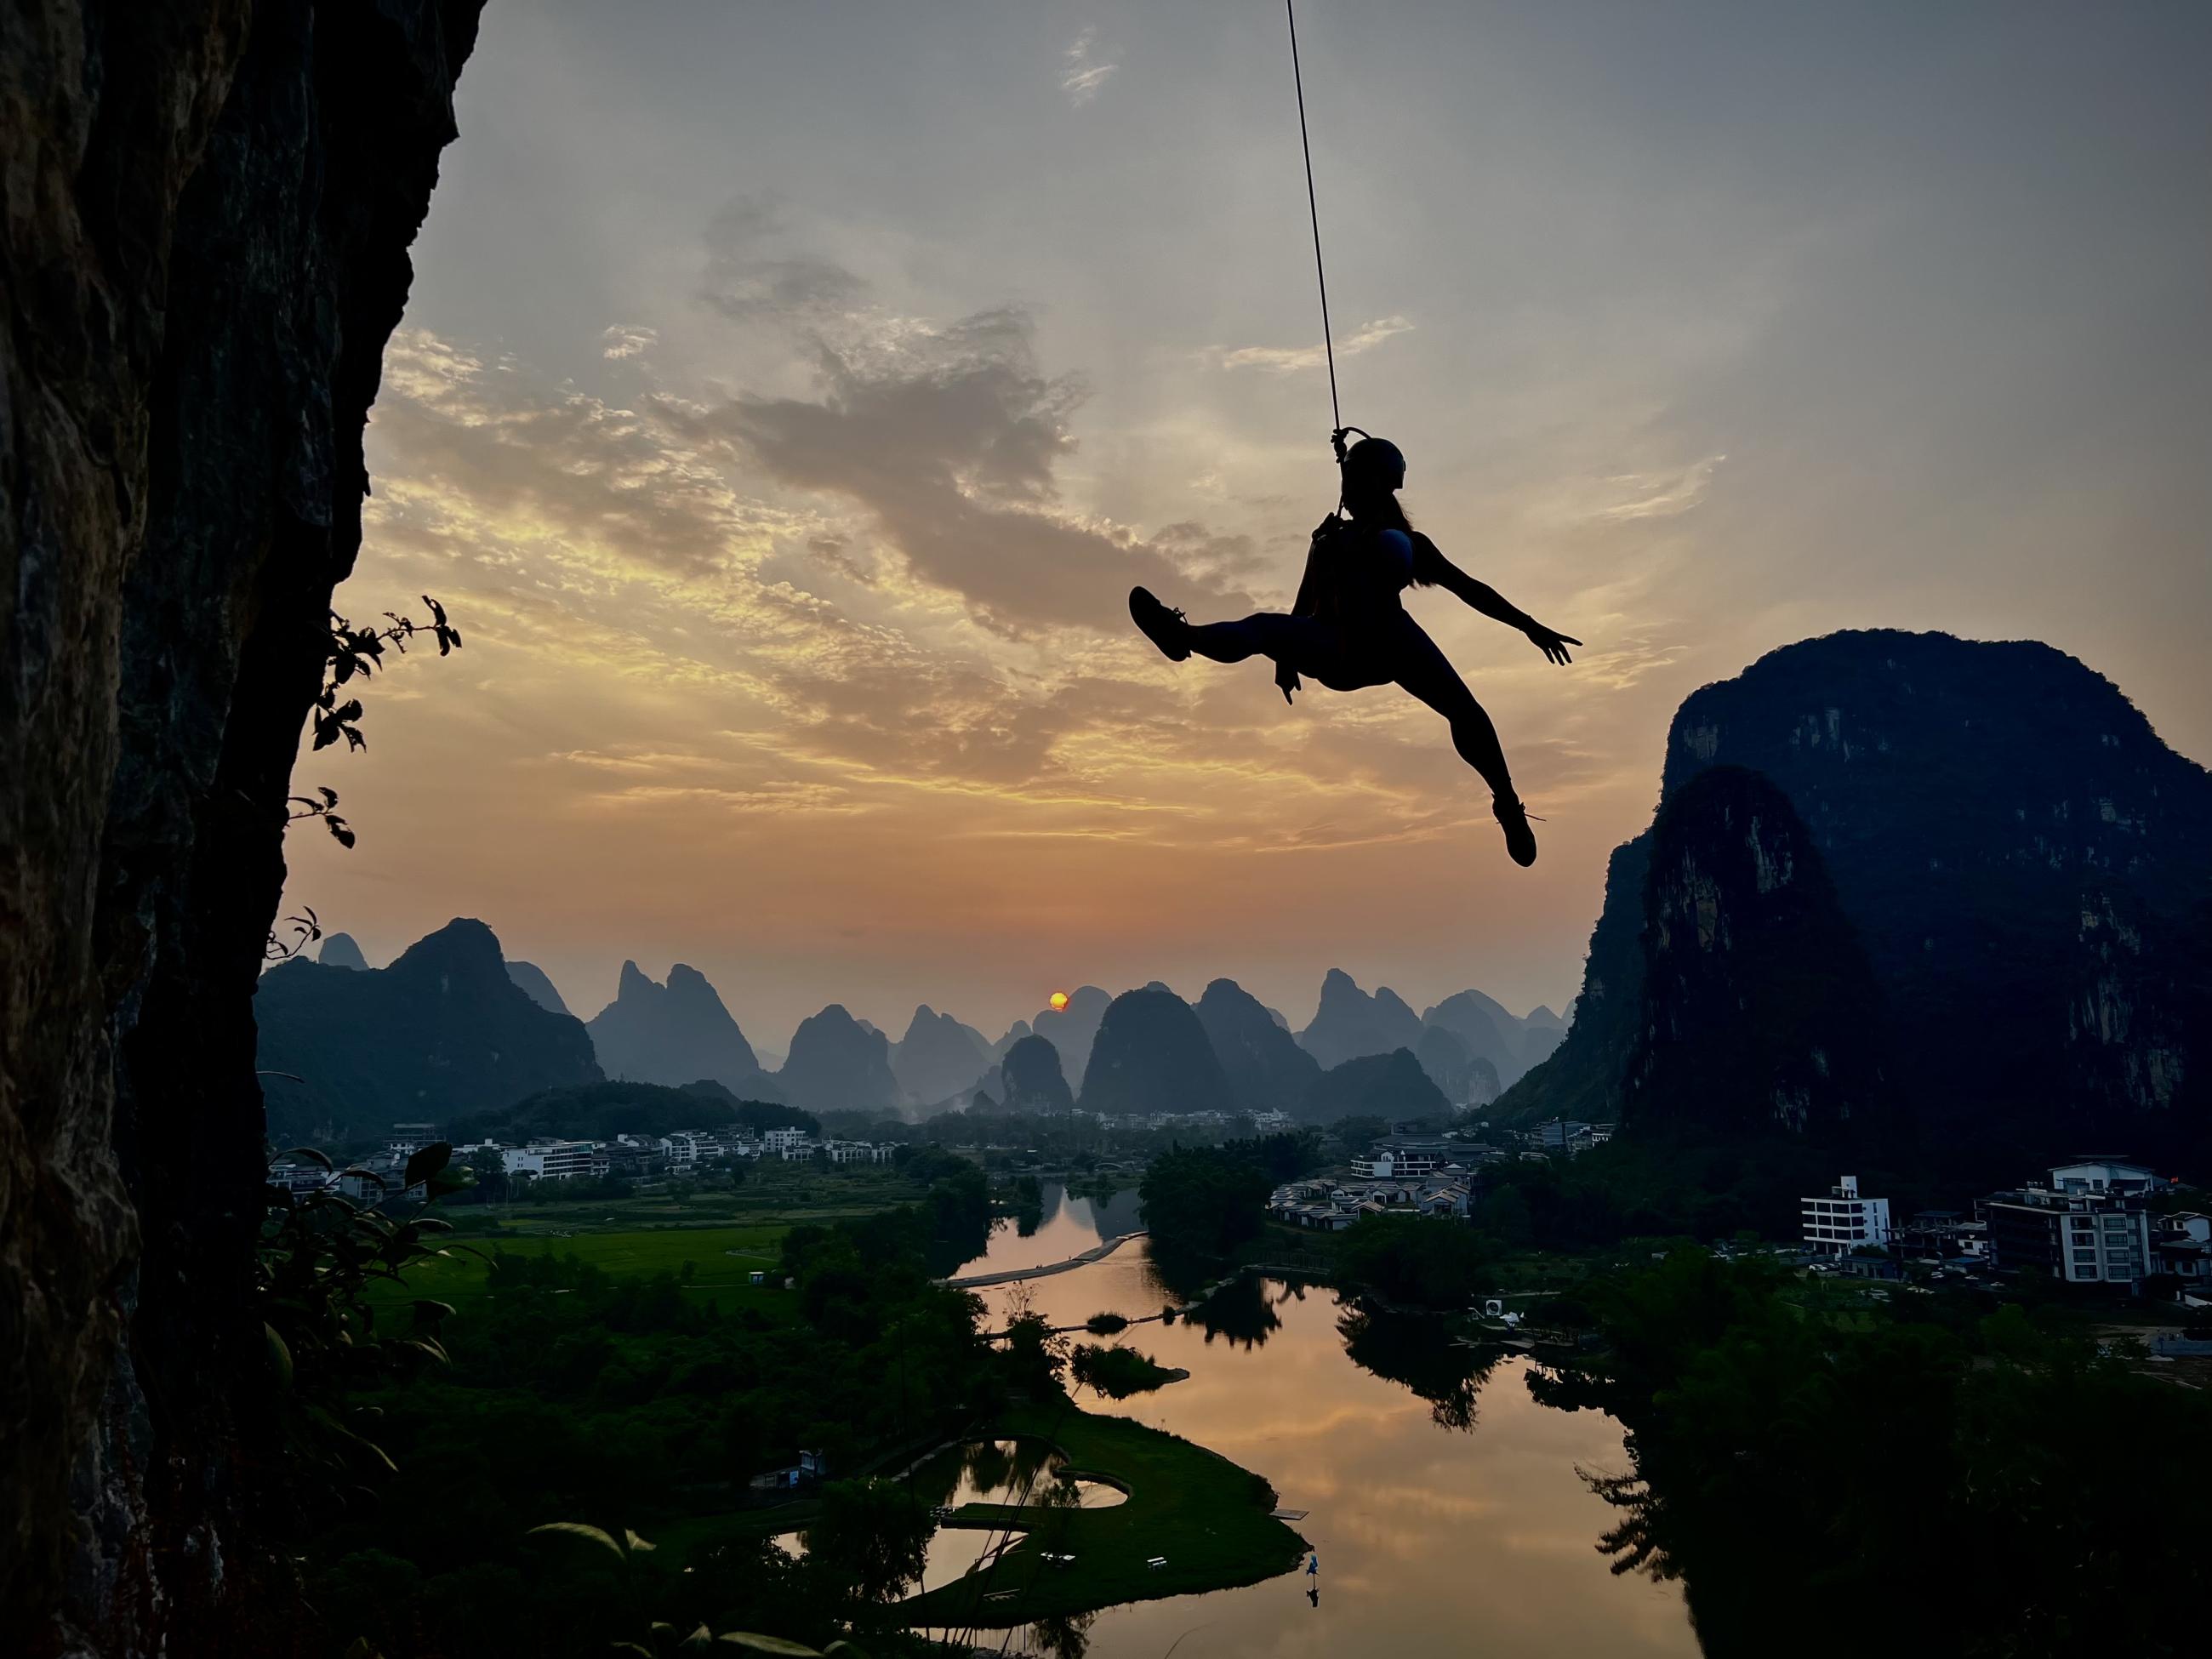 Min being lowered from a climb during her pregnancy in Yangshuo, China with the Li River in the background, 2022.